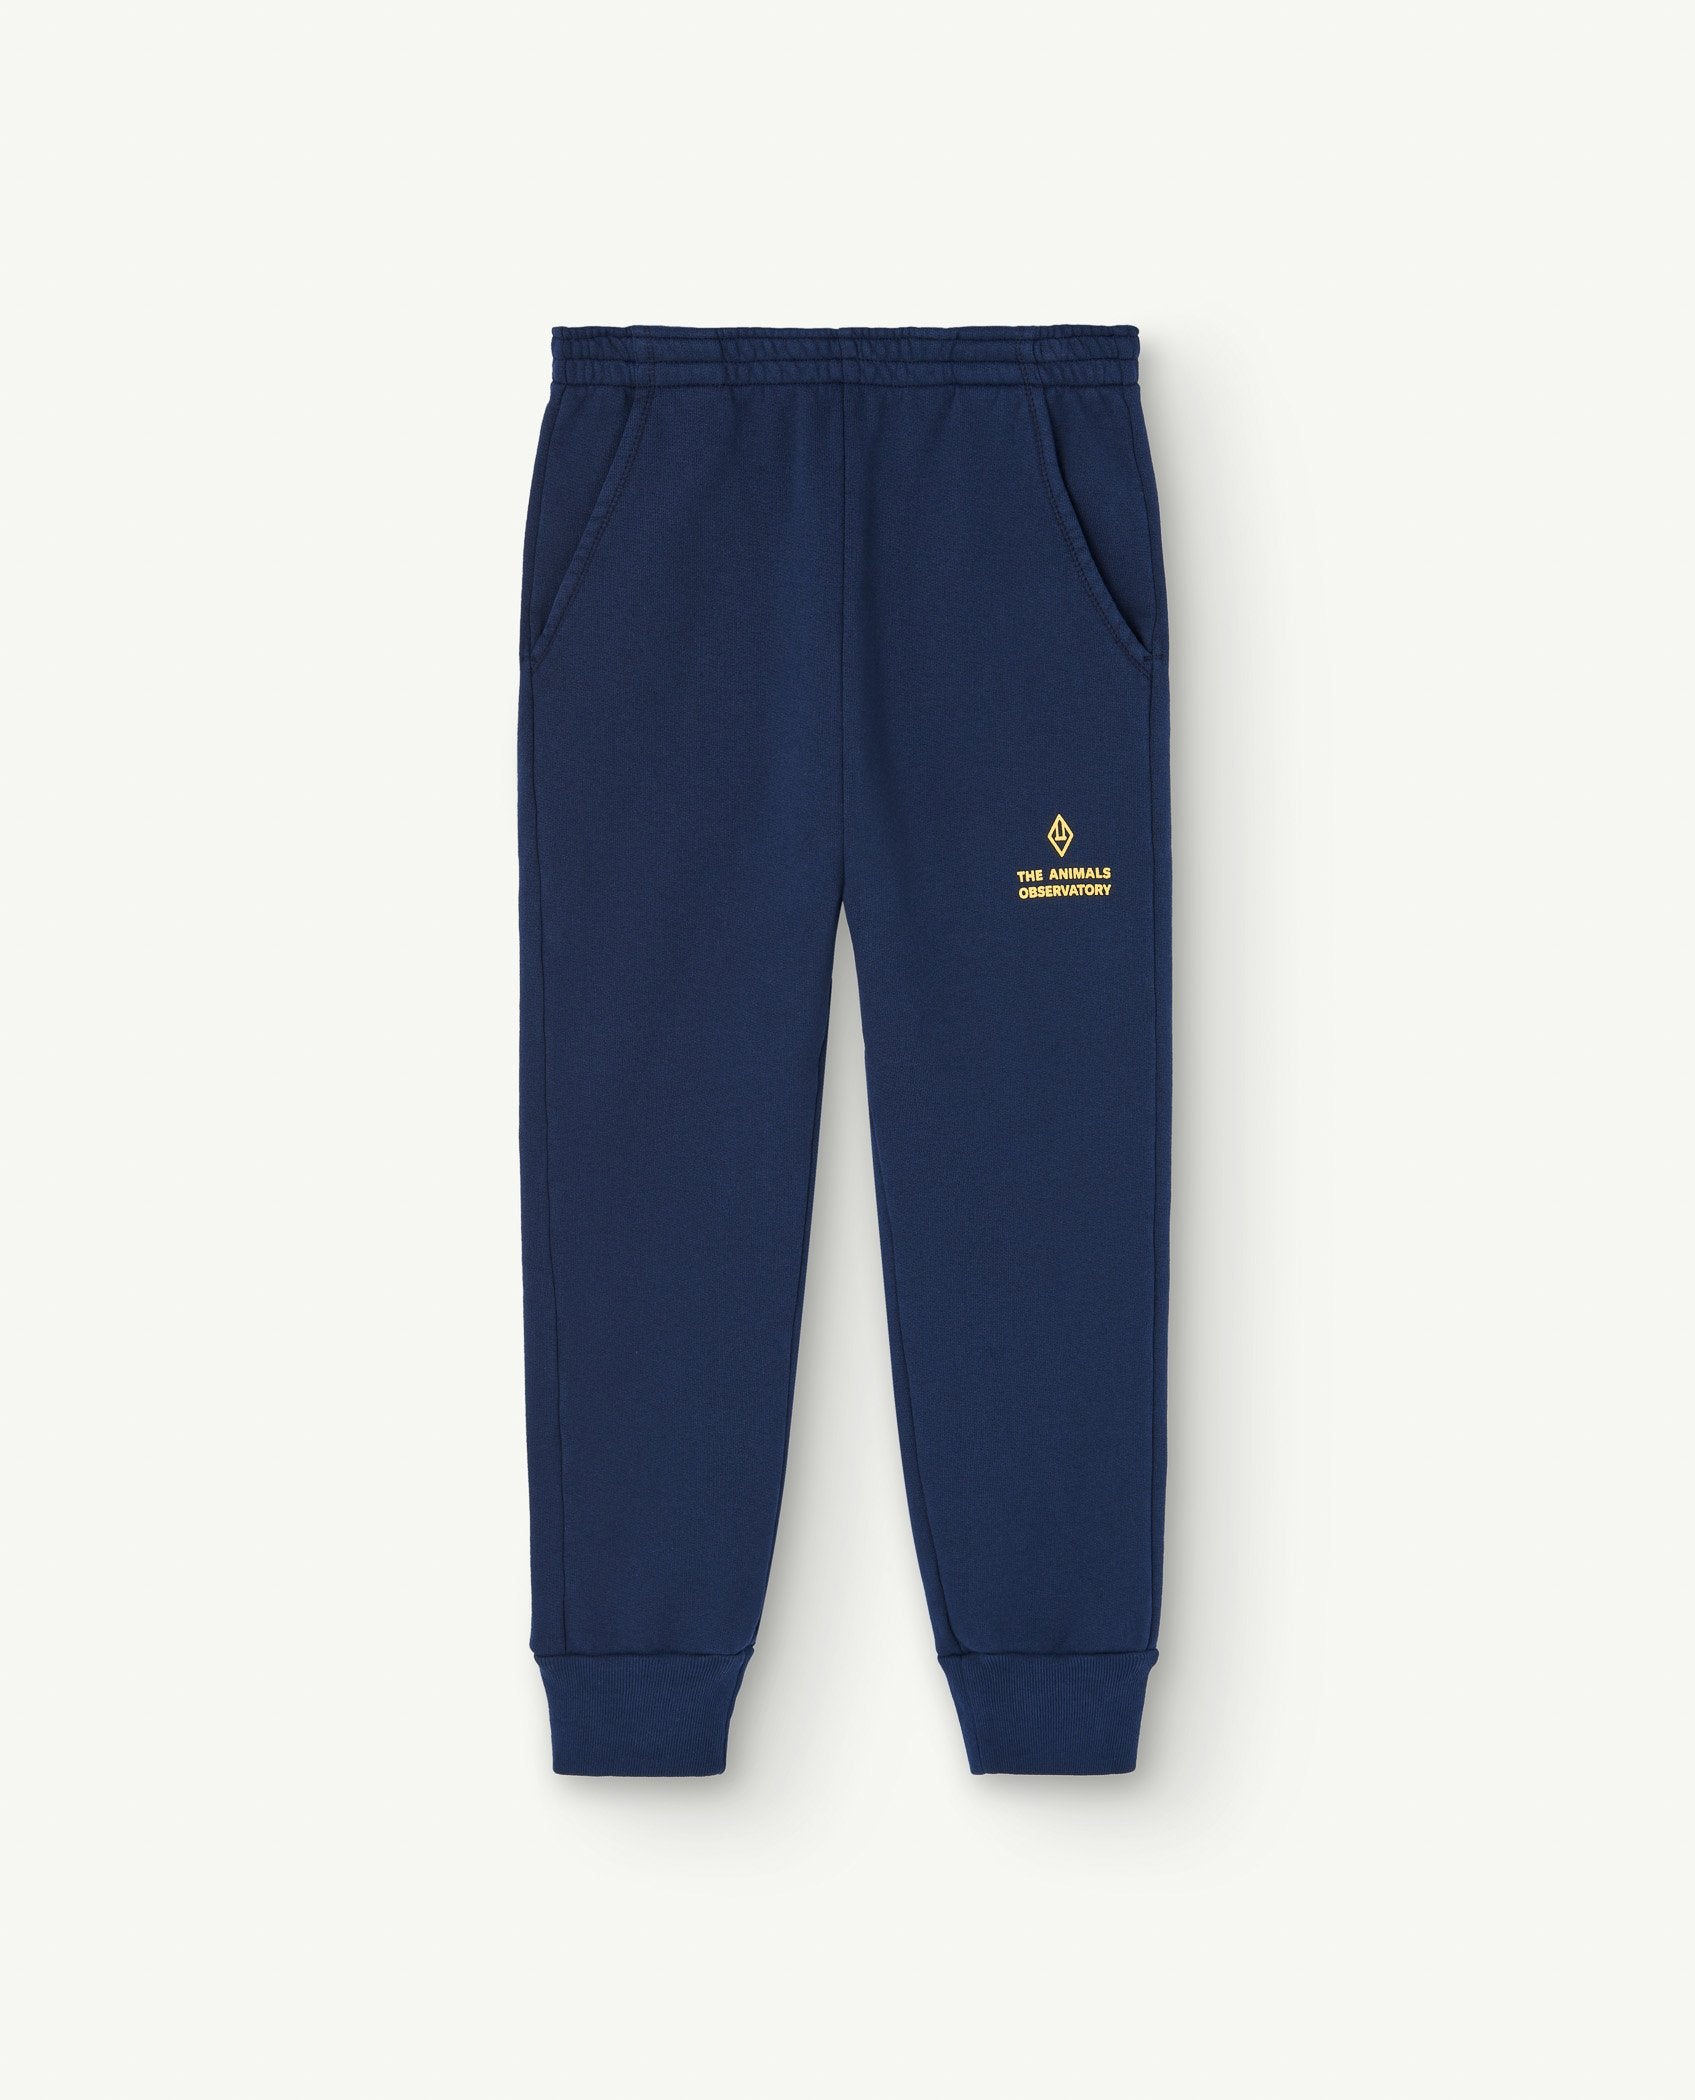 Navy Draco Kids Sweatpants PRODUCT FRONT